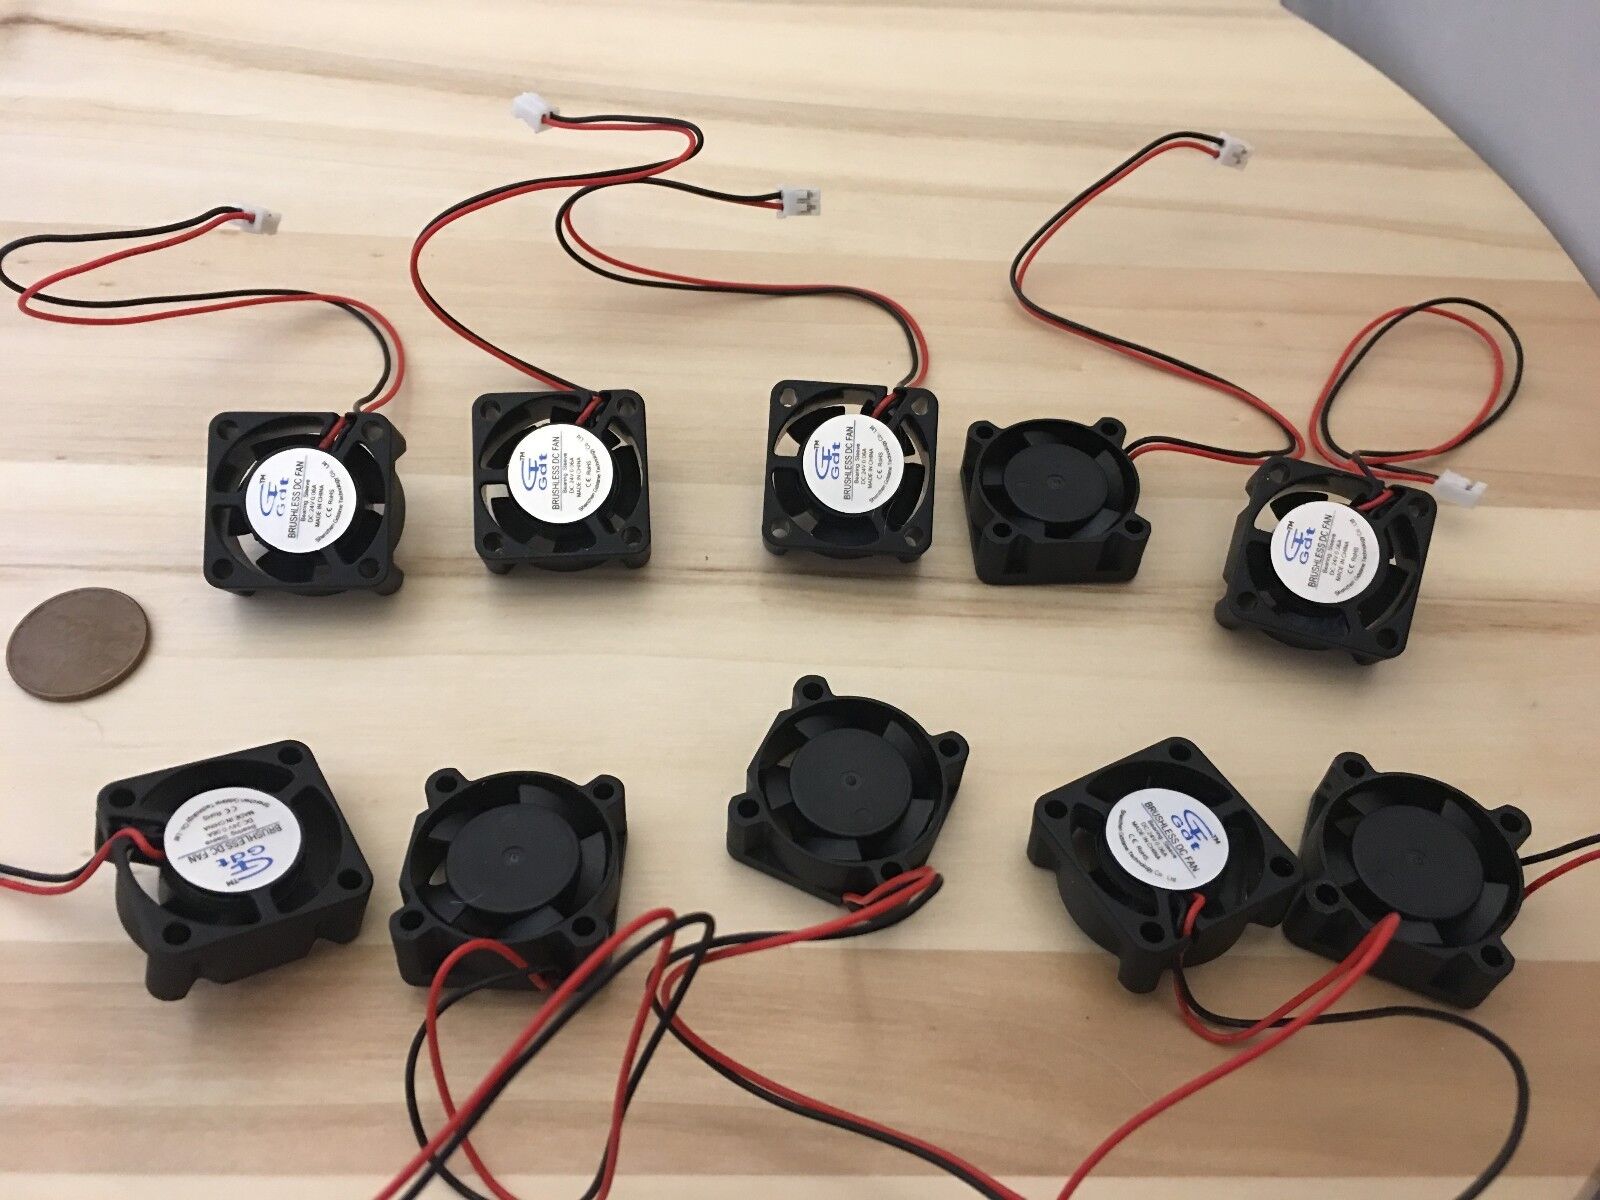 10 Pieces - 24v - Fan 25mm x 25 x 10 Brushless Cooling  small micro Flow CFM